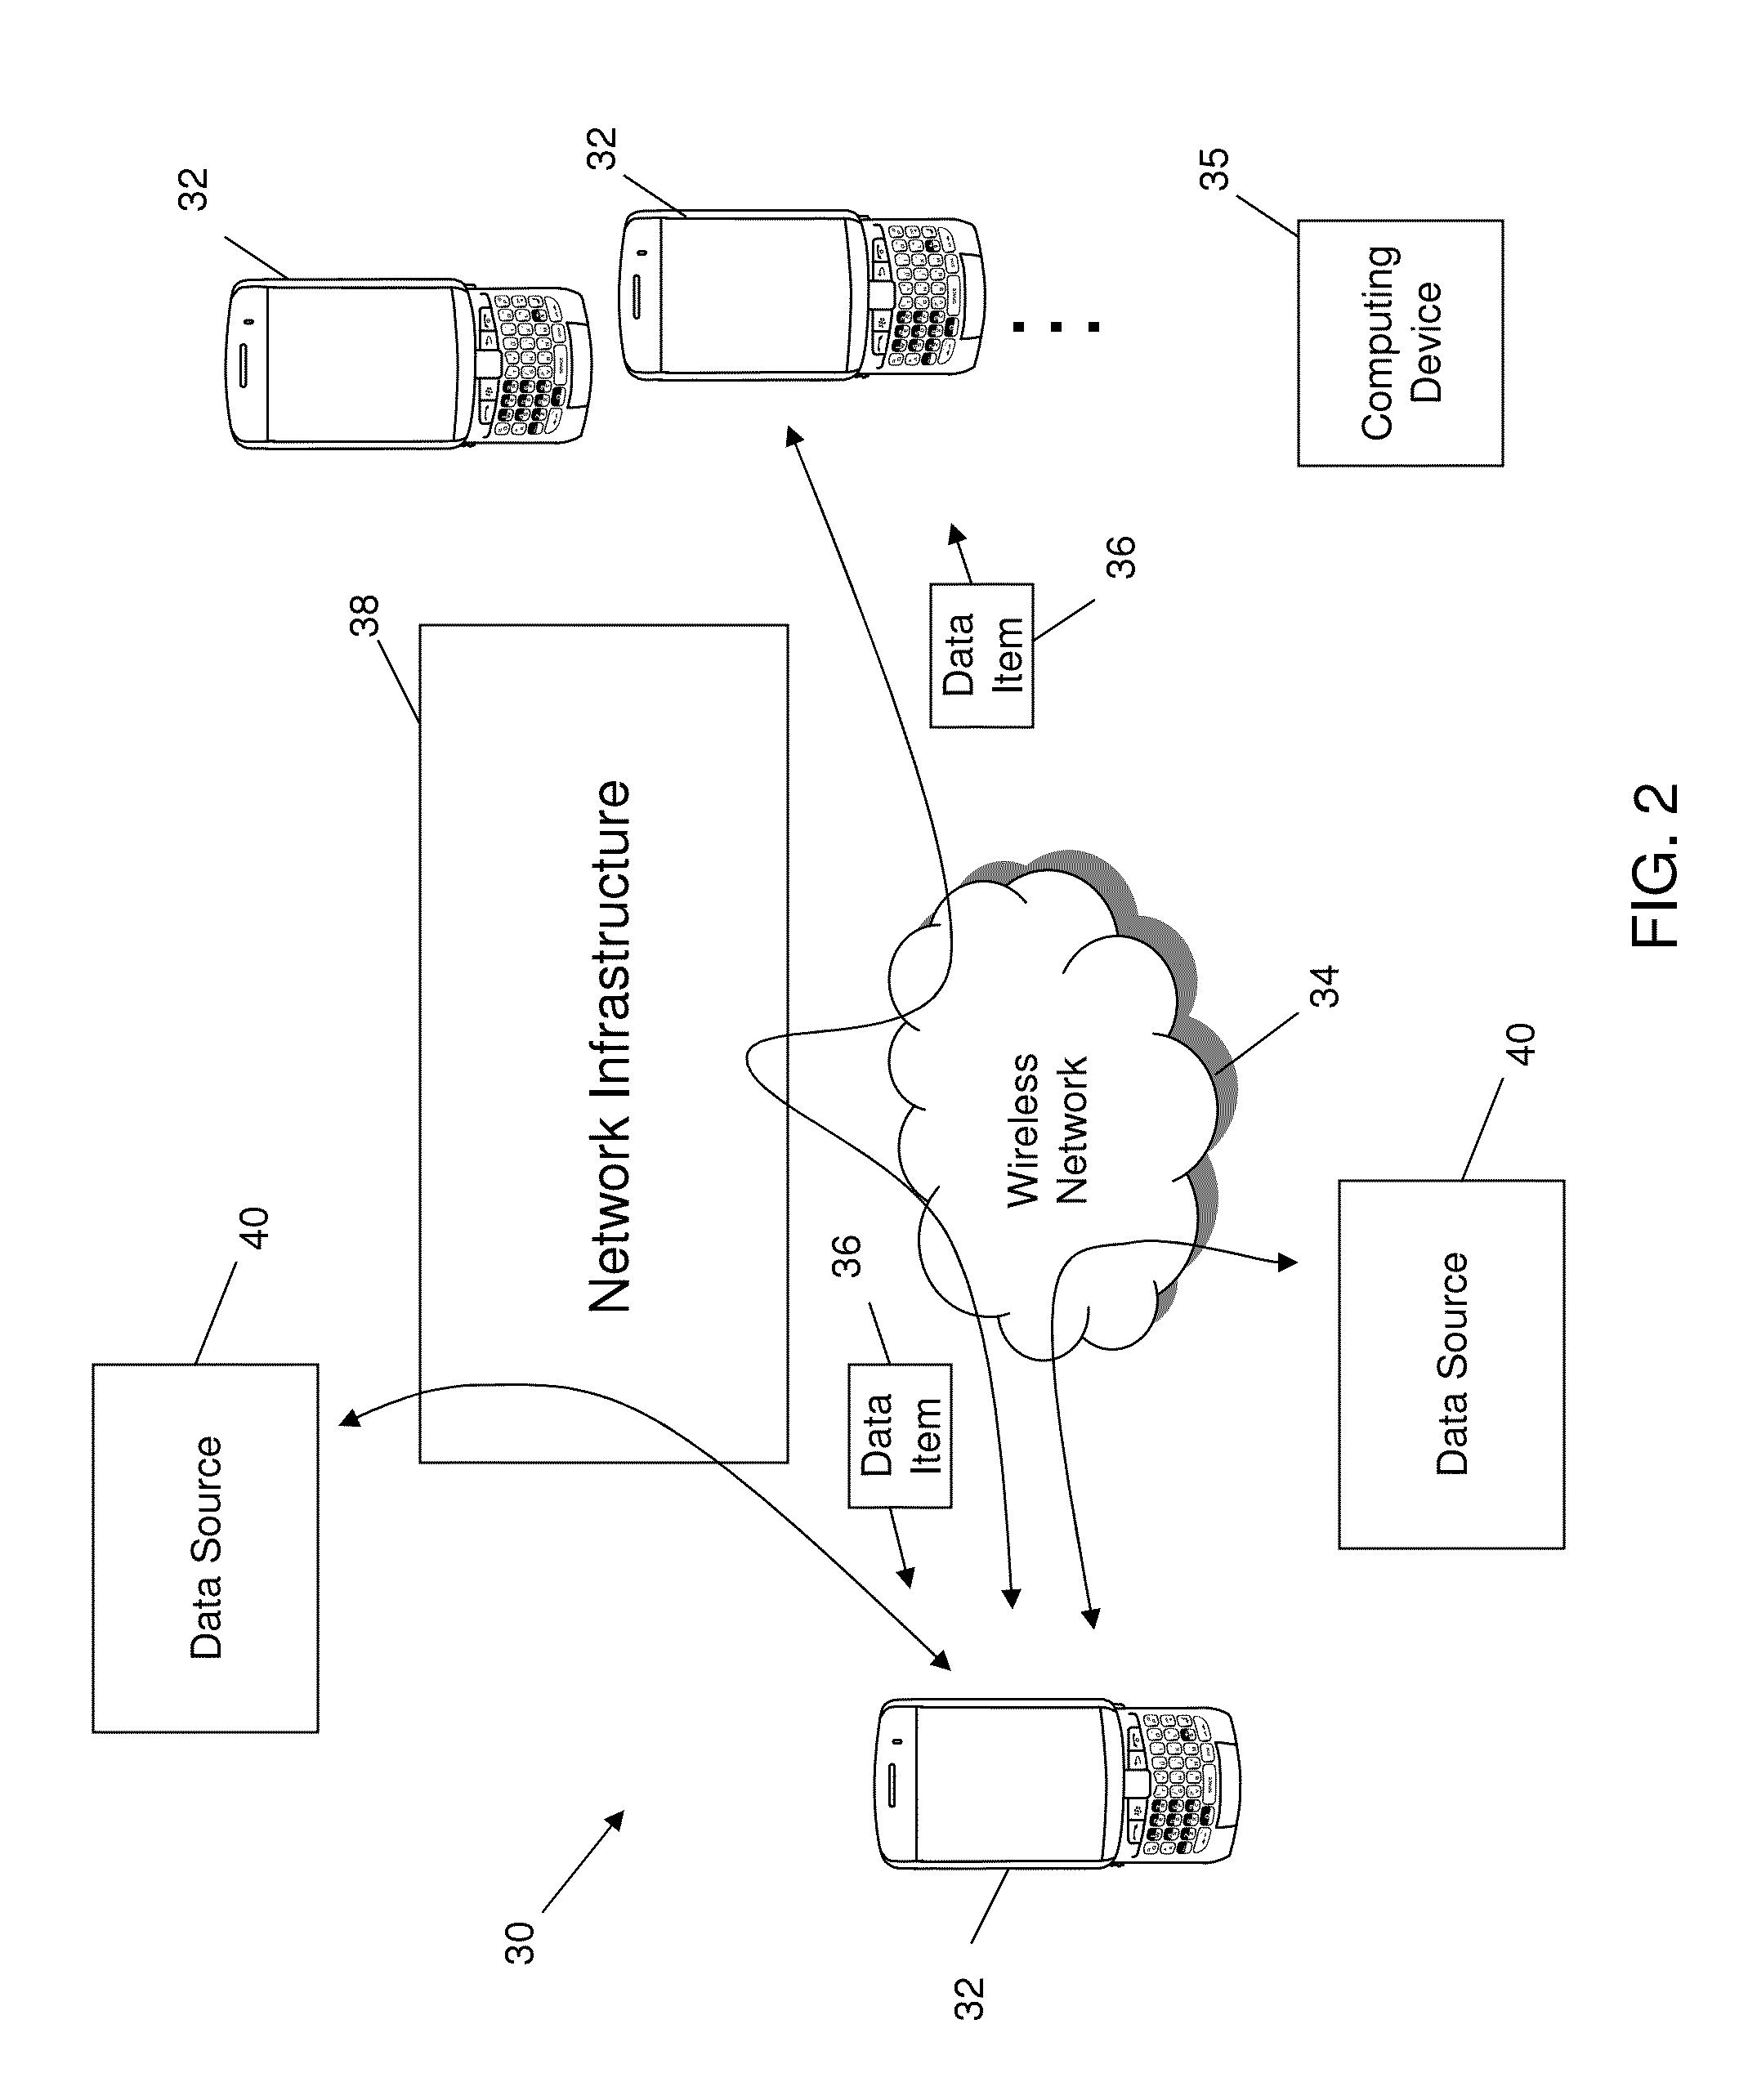 System and method for navigating between user interface elements